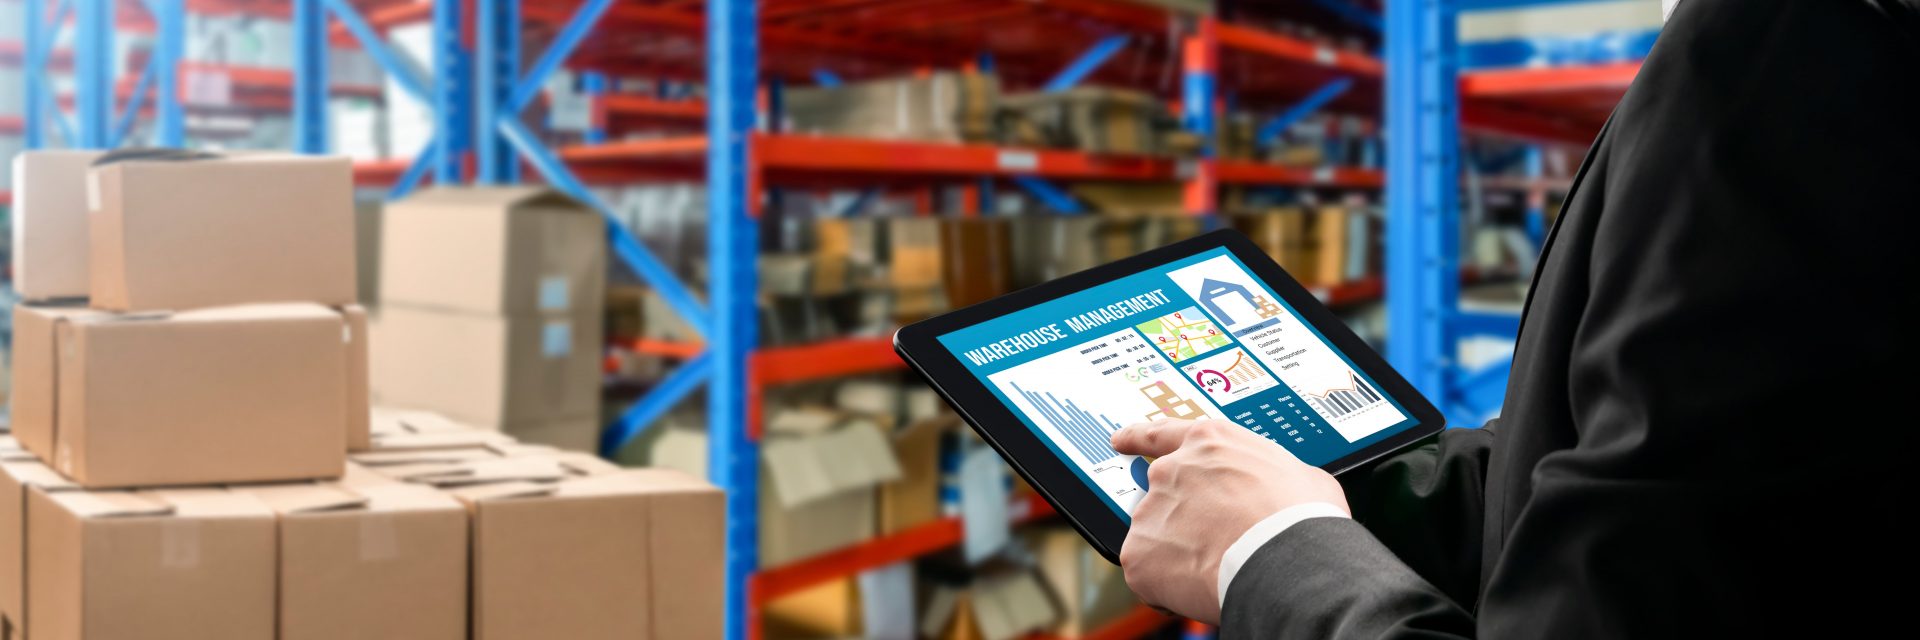 How IoT and RFID Are Disrupting the Supply Chain Industry